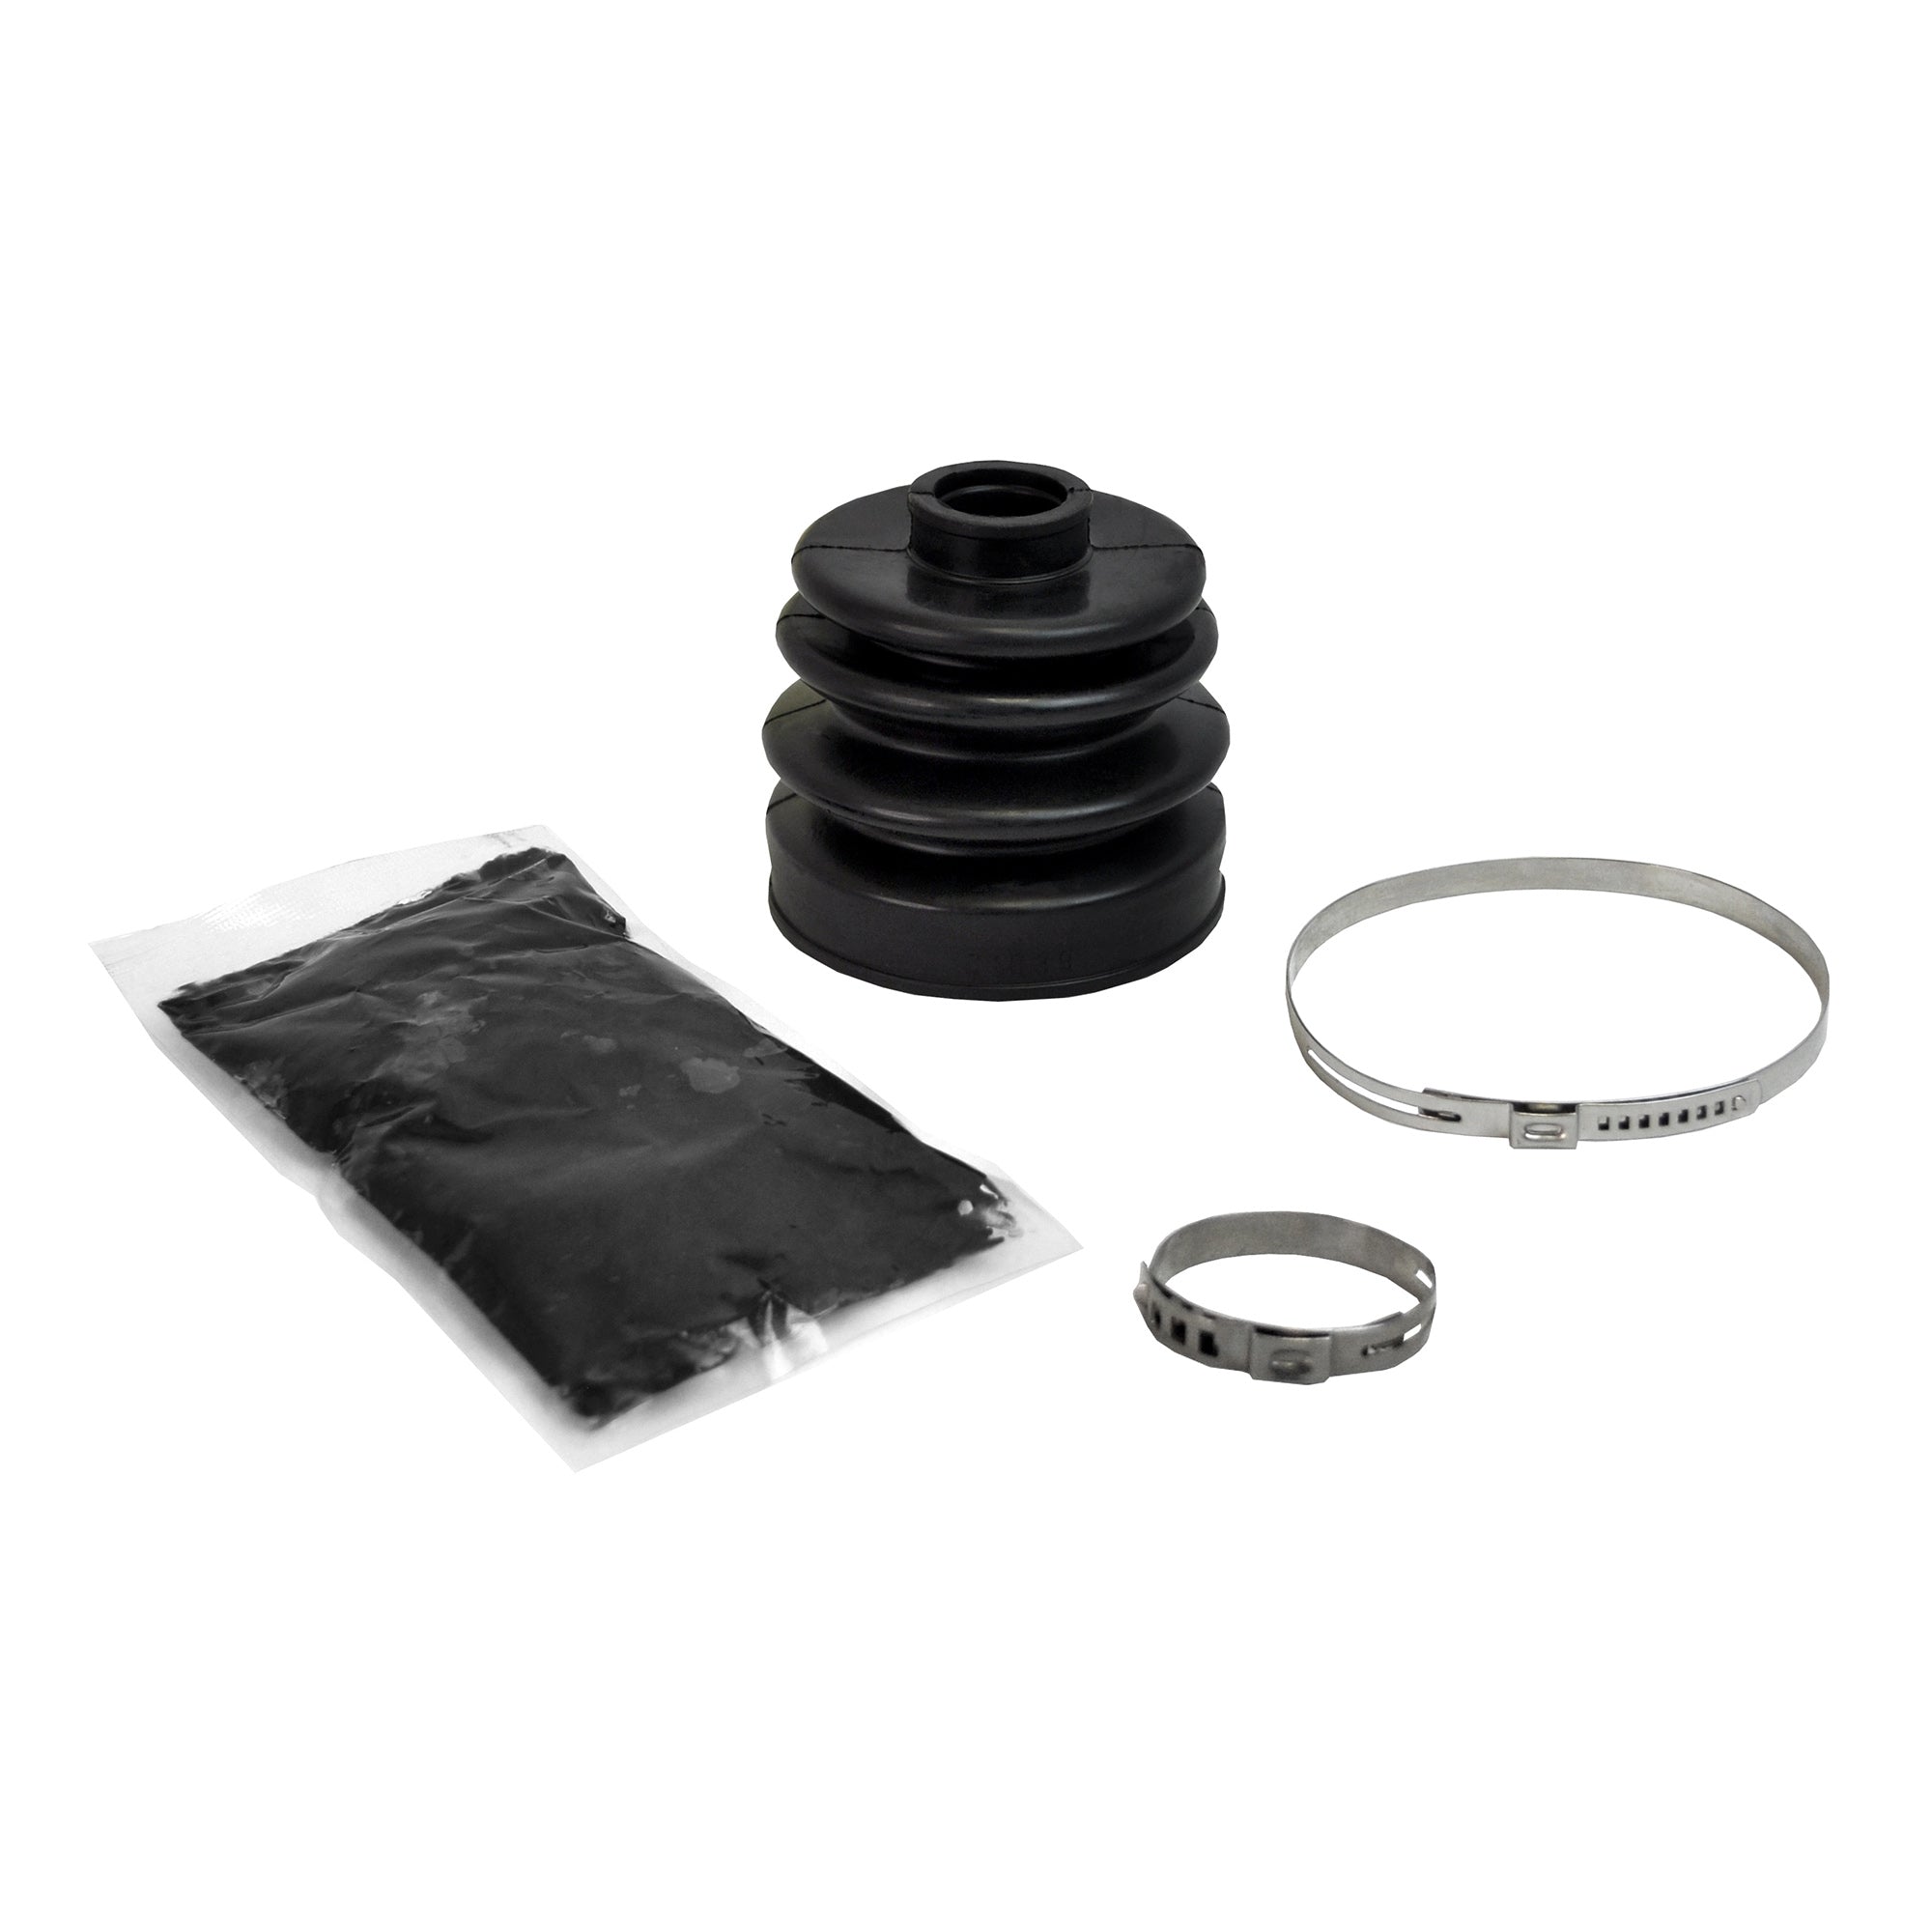 Polaris RZR 900 Rugged OE Replacement Boot Kit